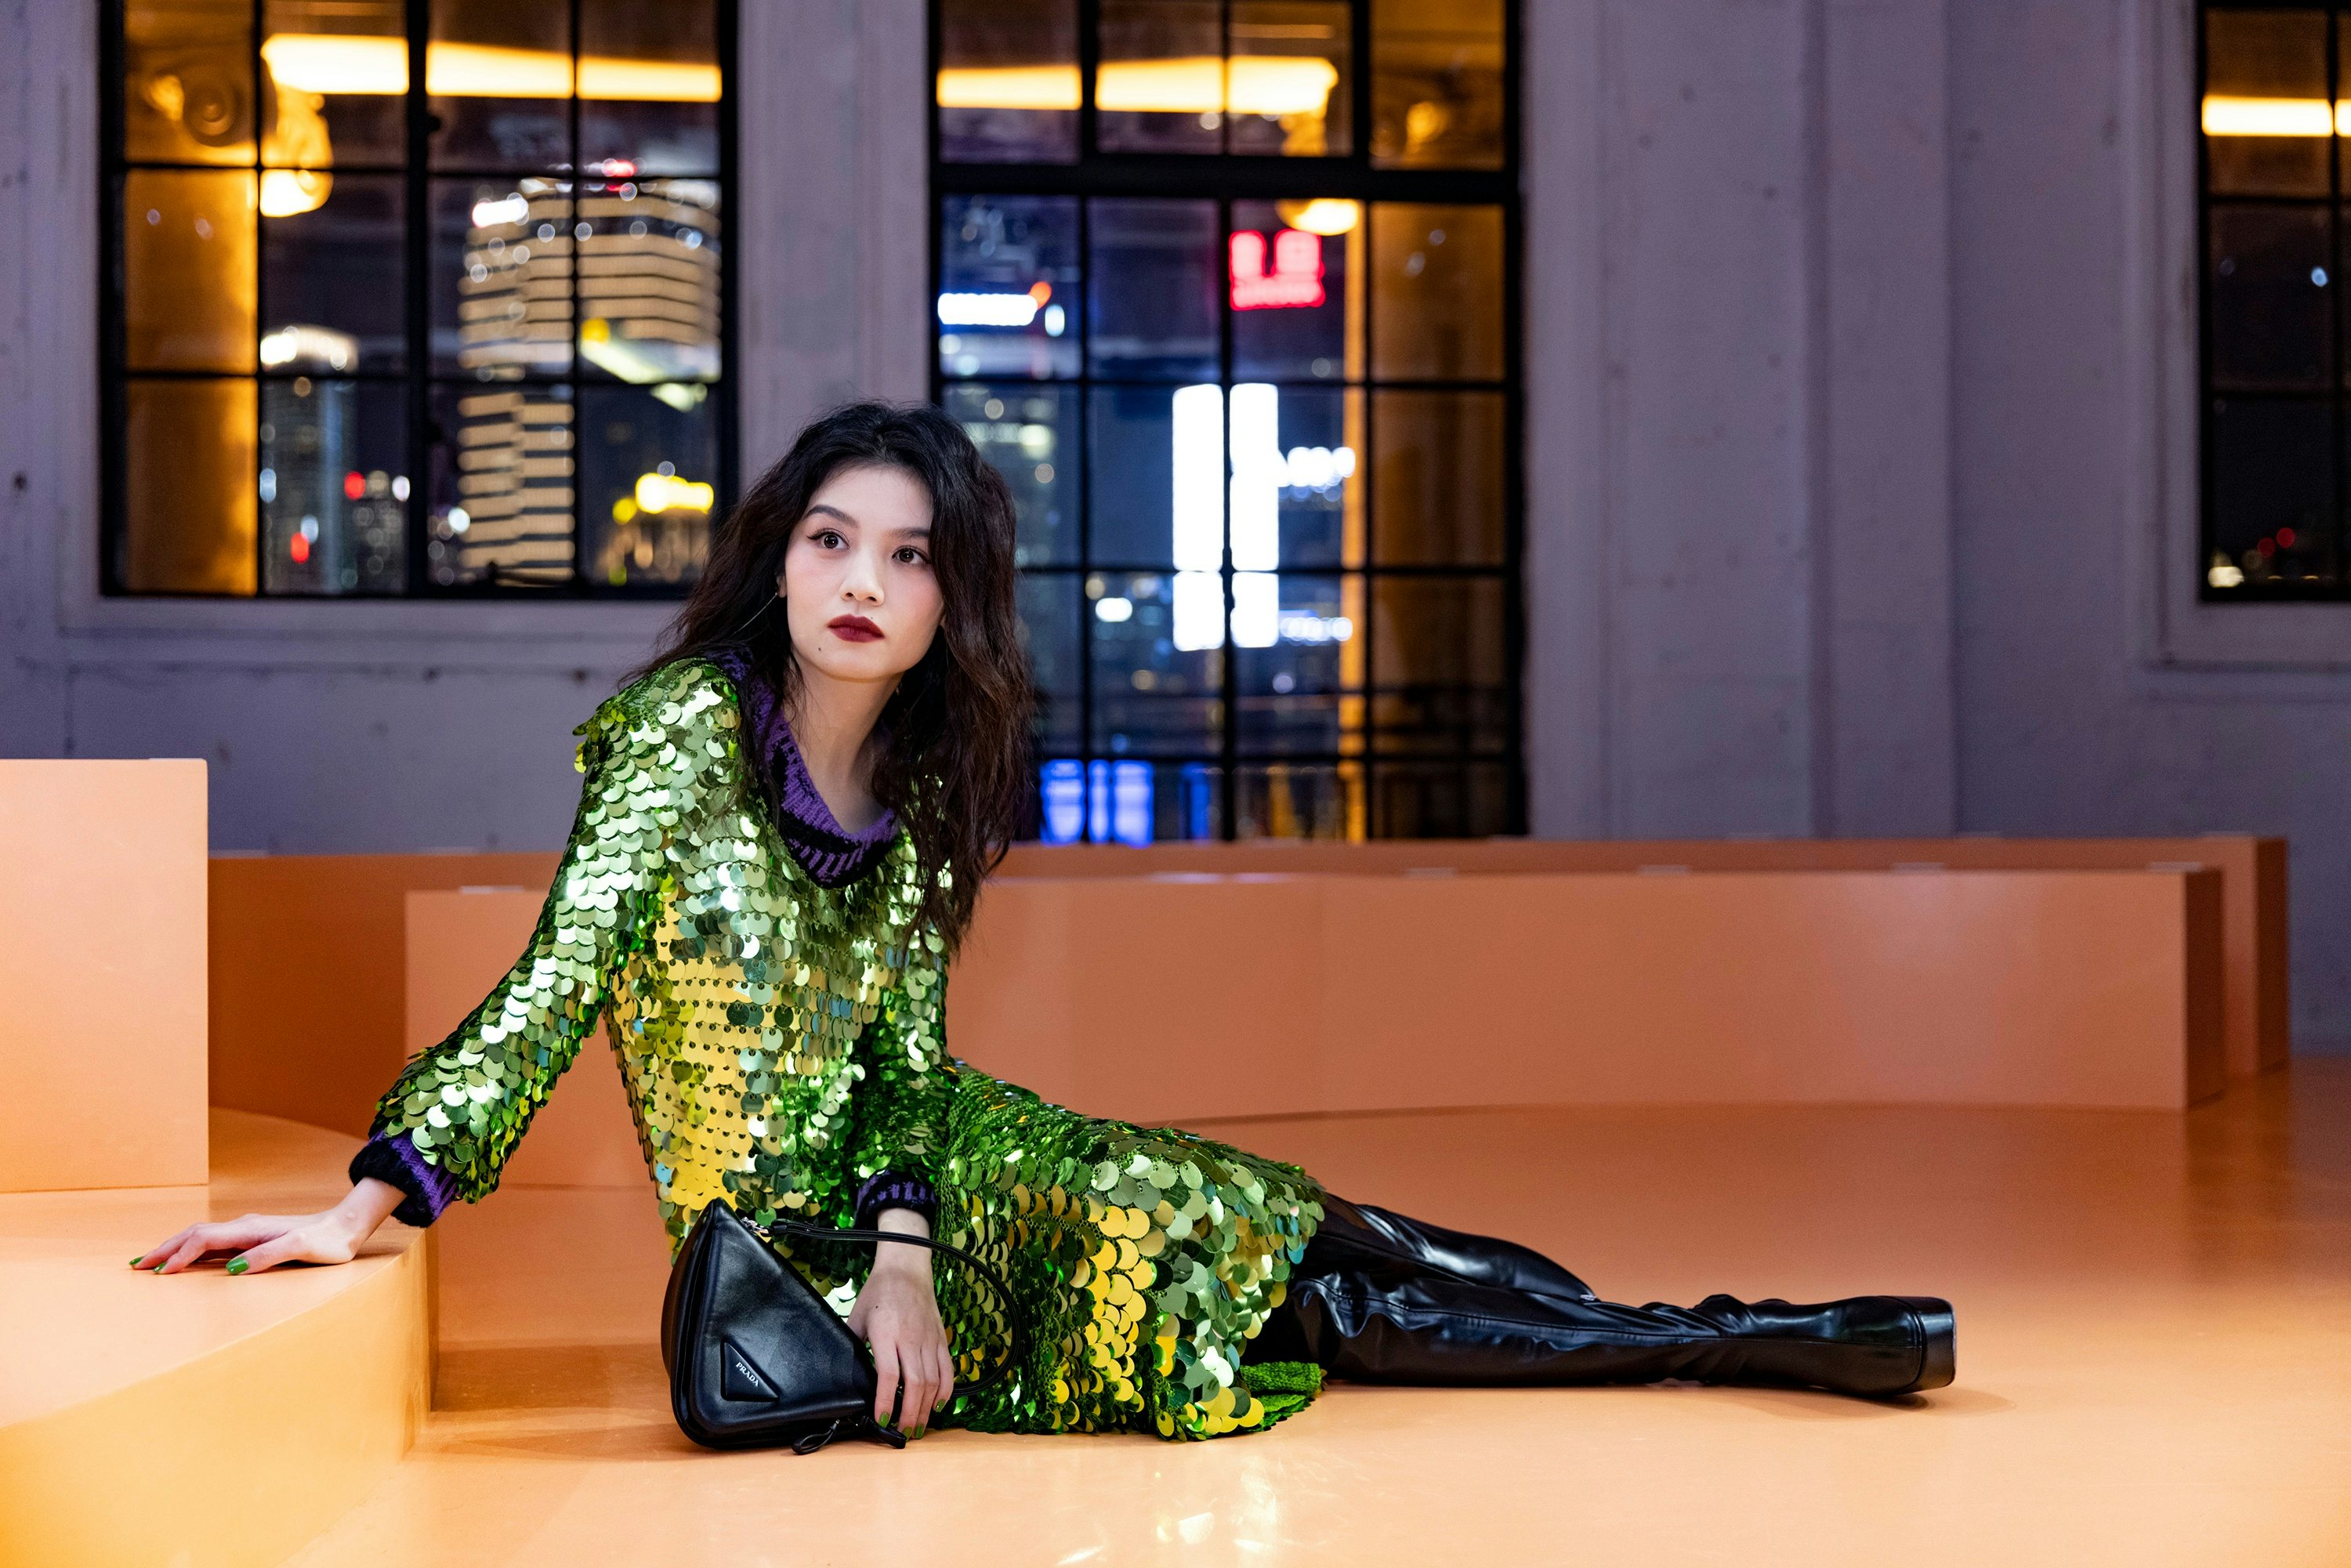 Actress Chun xia attends the Prada Spring/Summer 2022 Womenswear Fashion Show on September 24, 2021 in Shanghai, China. Photo: Getty Images